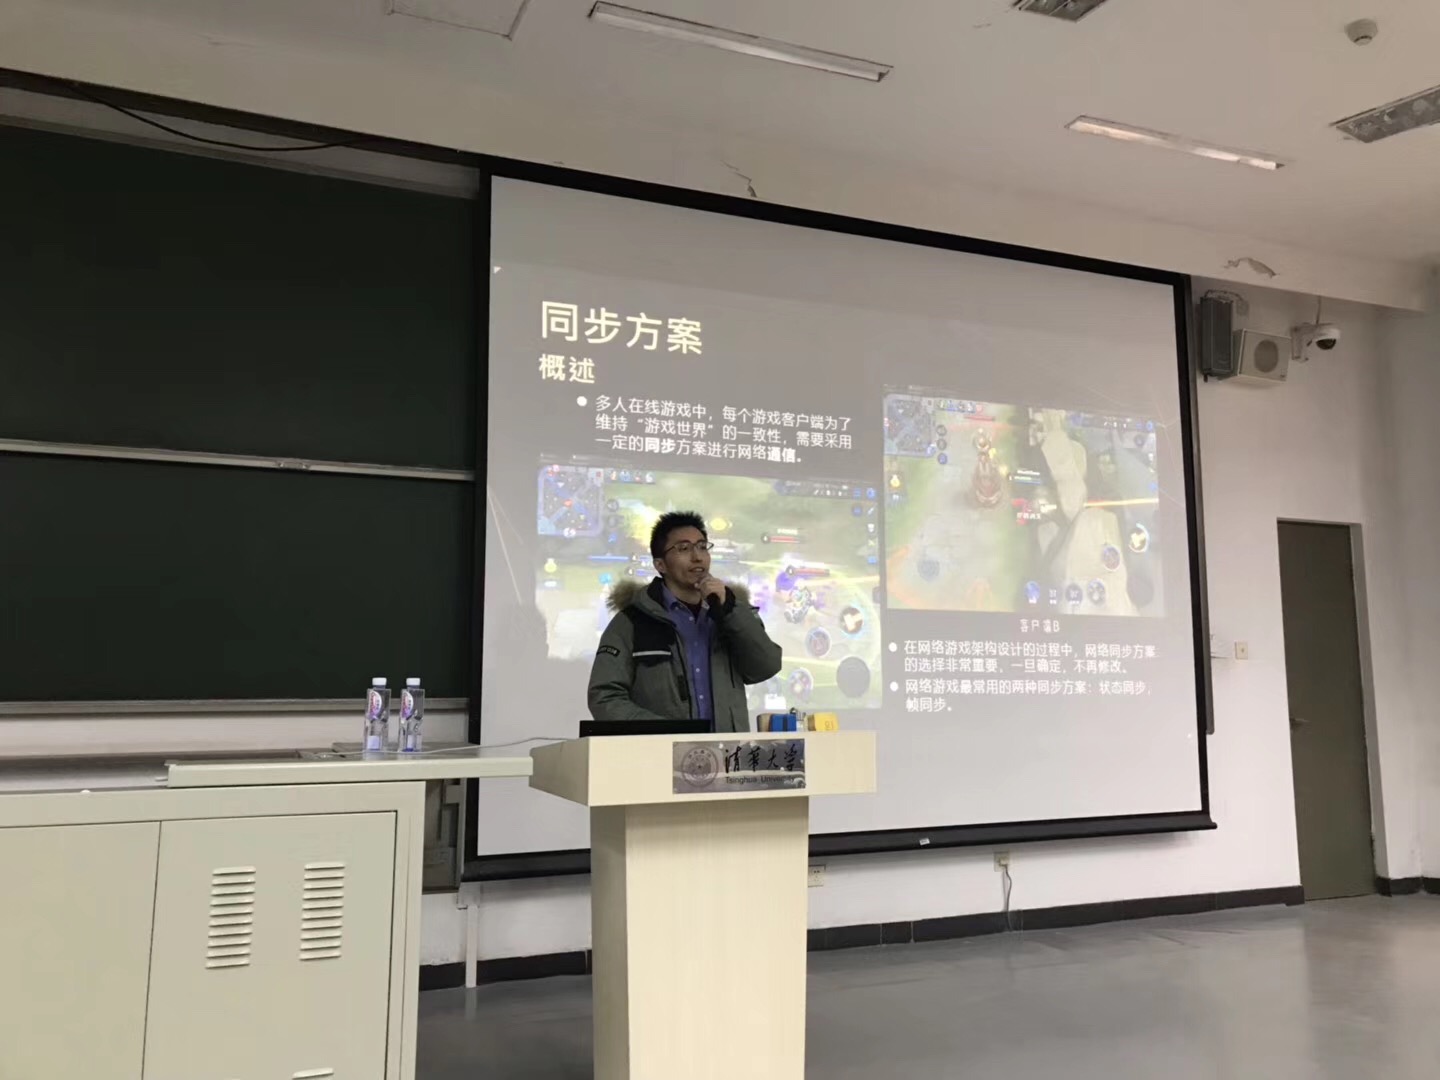 Dec 2018:  Dan hosted the guest lectures by speakers from Tencent, Alibaba, Baidu, and ByteDance.